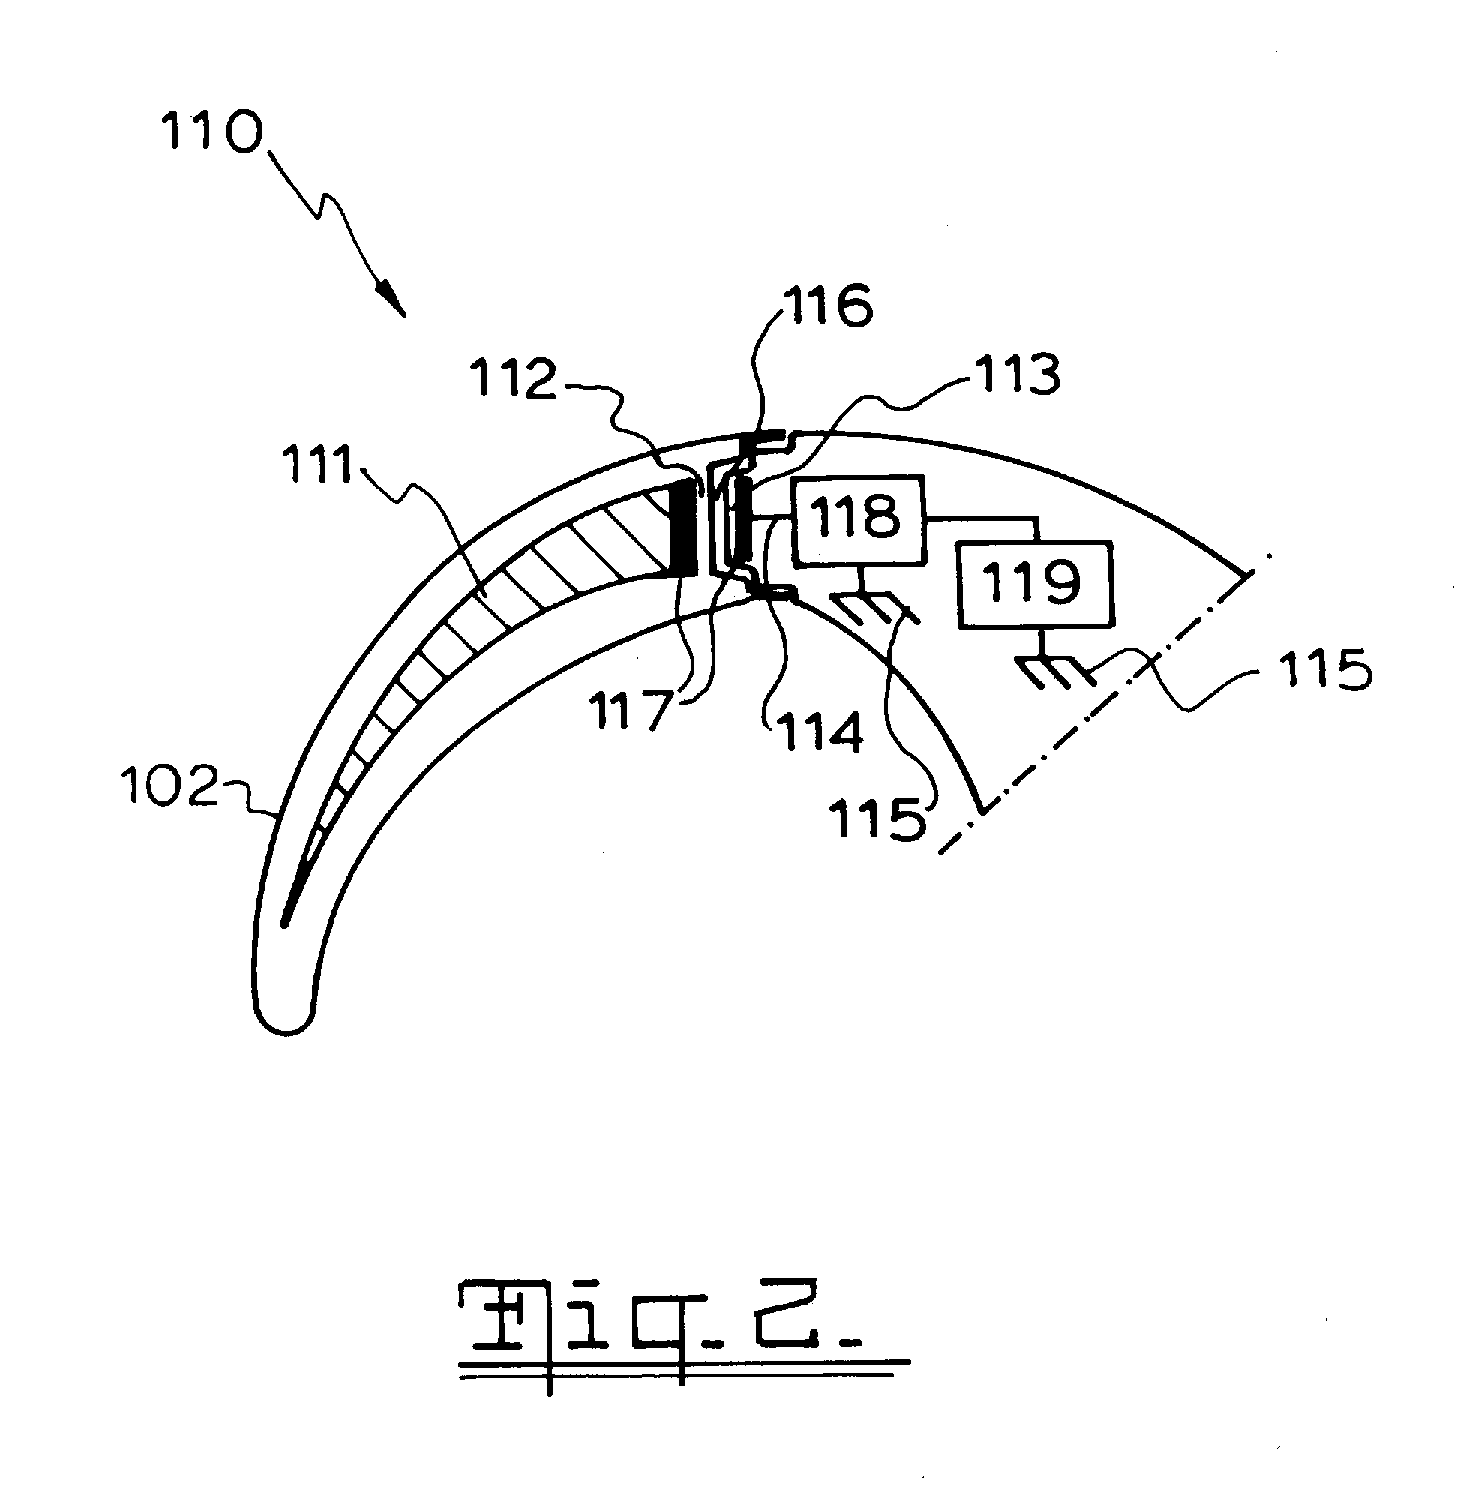 Antenna for behind-the-ear (BTE) devices